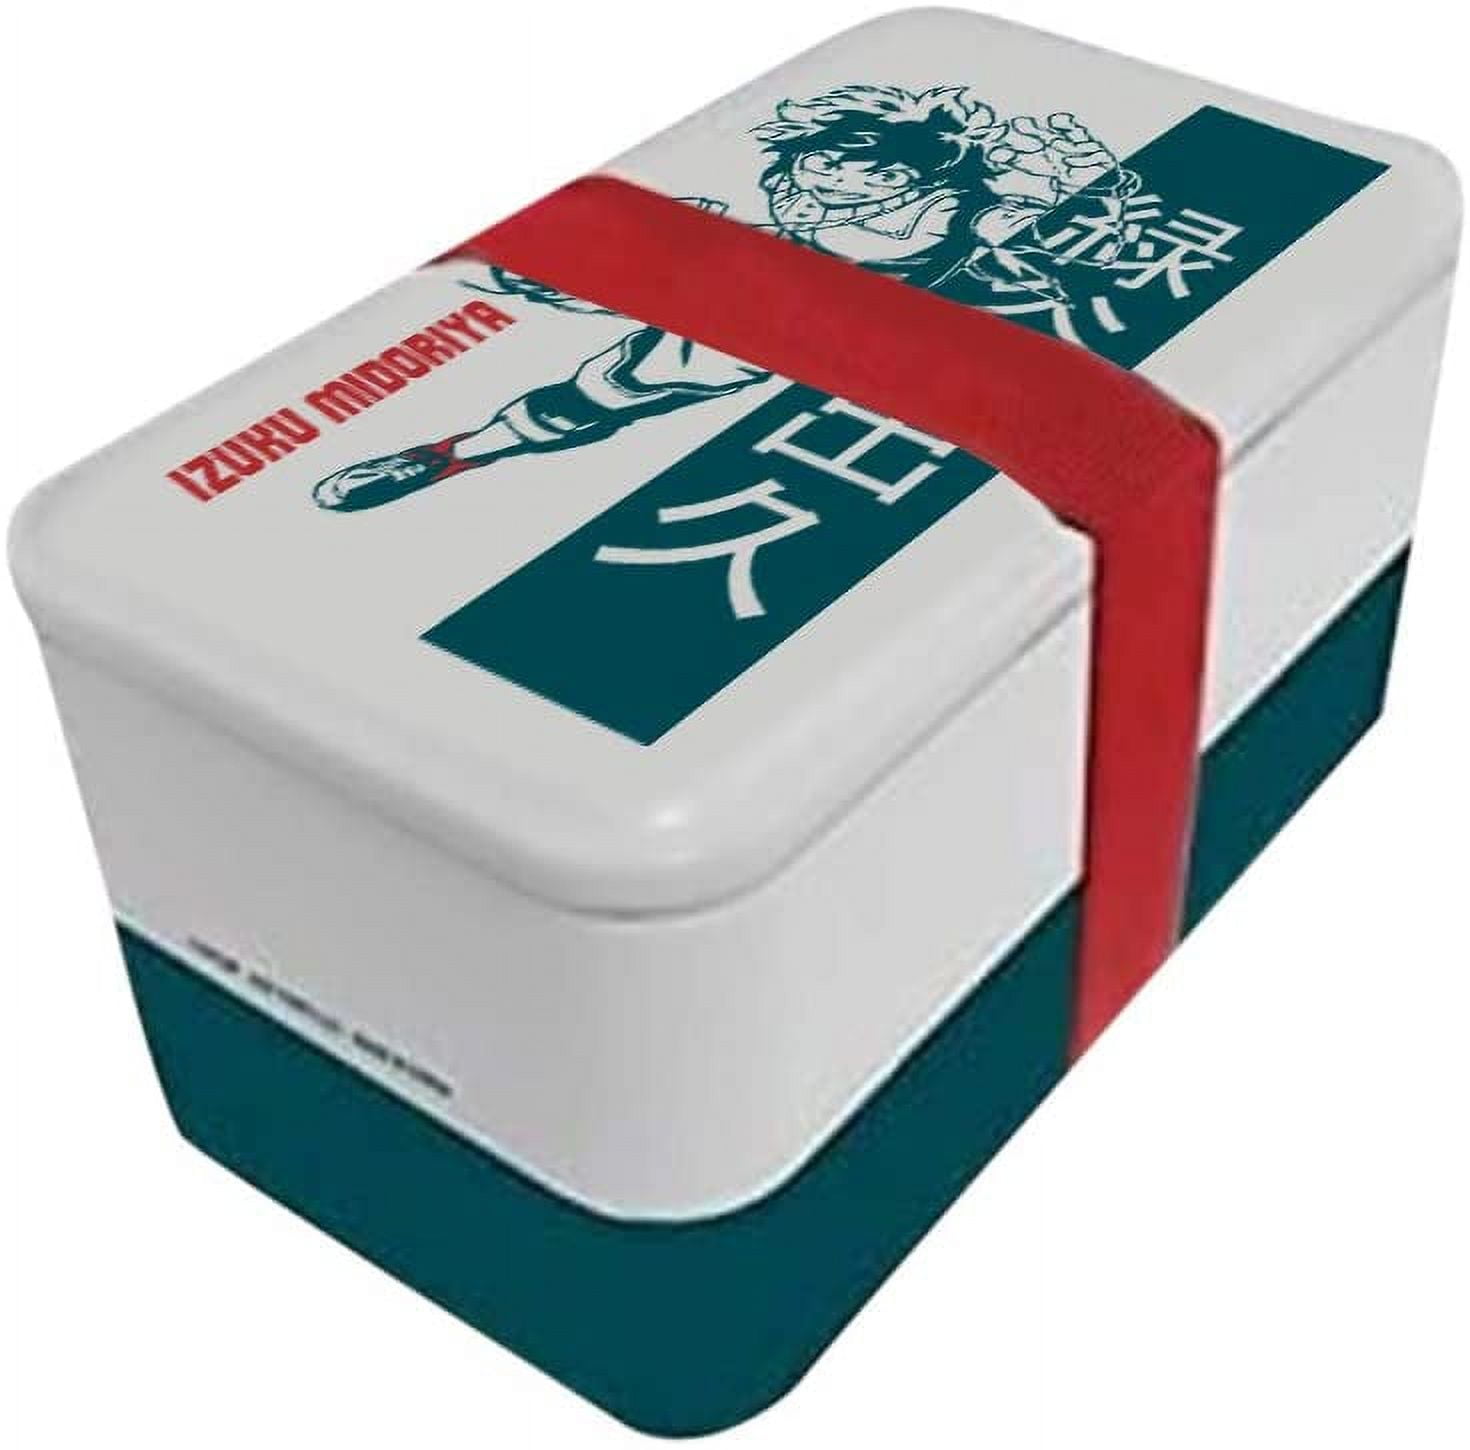 My Hero Academia Mint Green Stackable Bento Lunch Box - Bed Bath